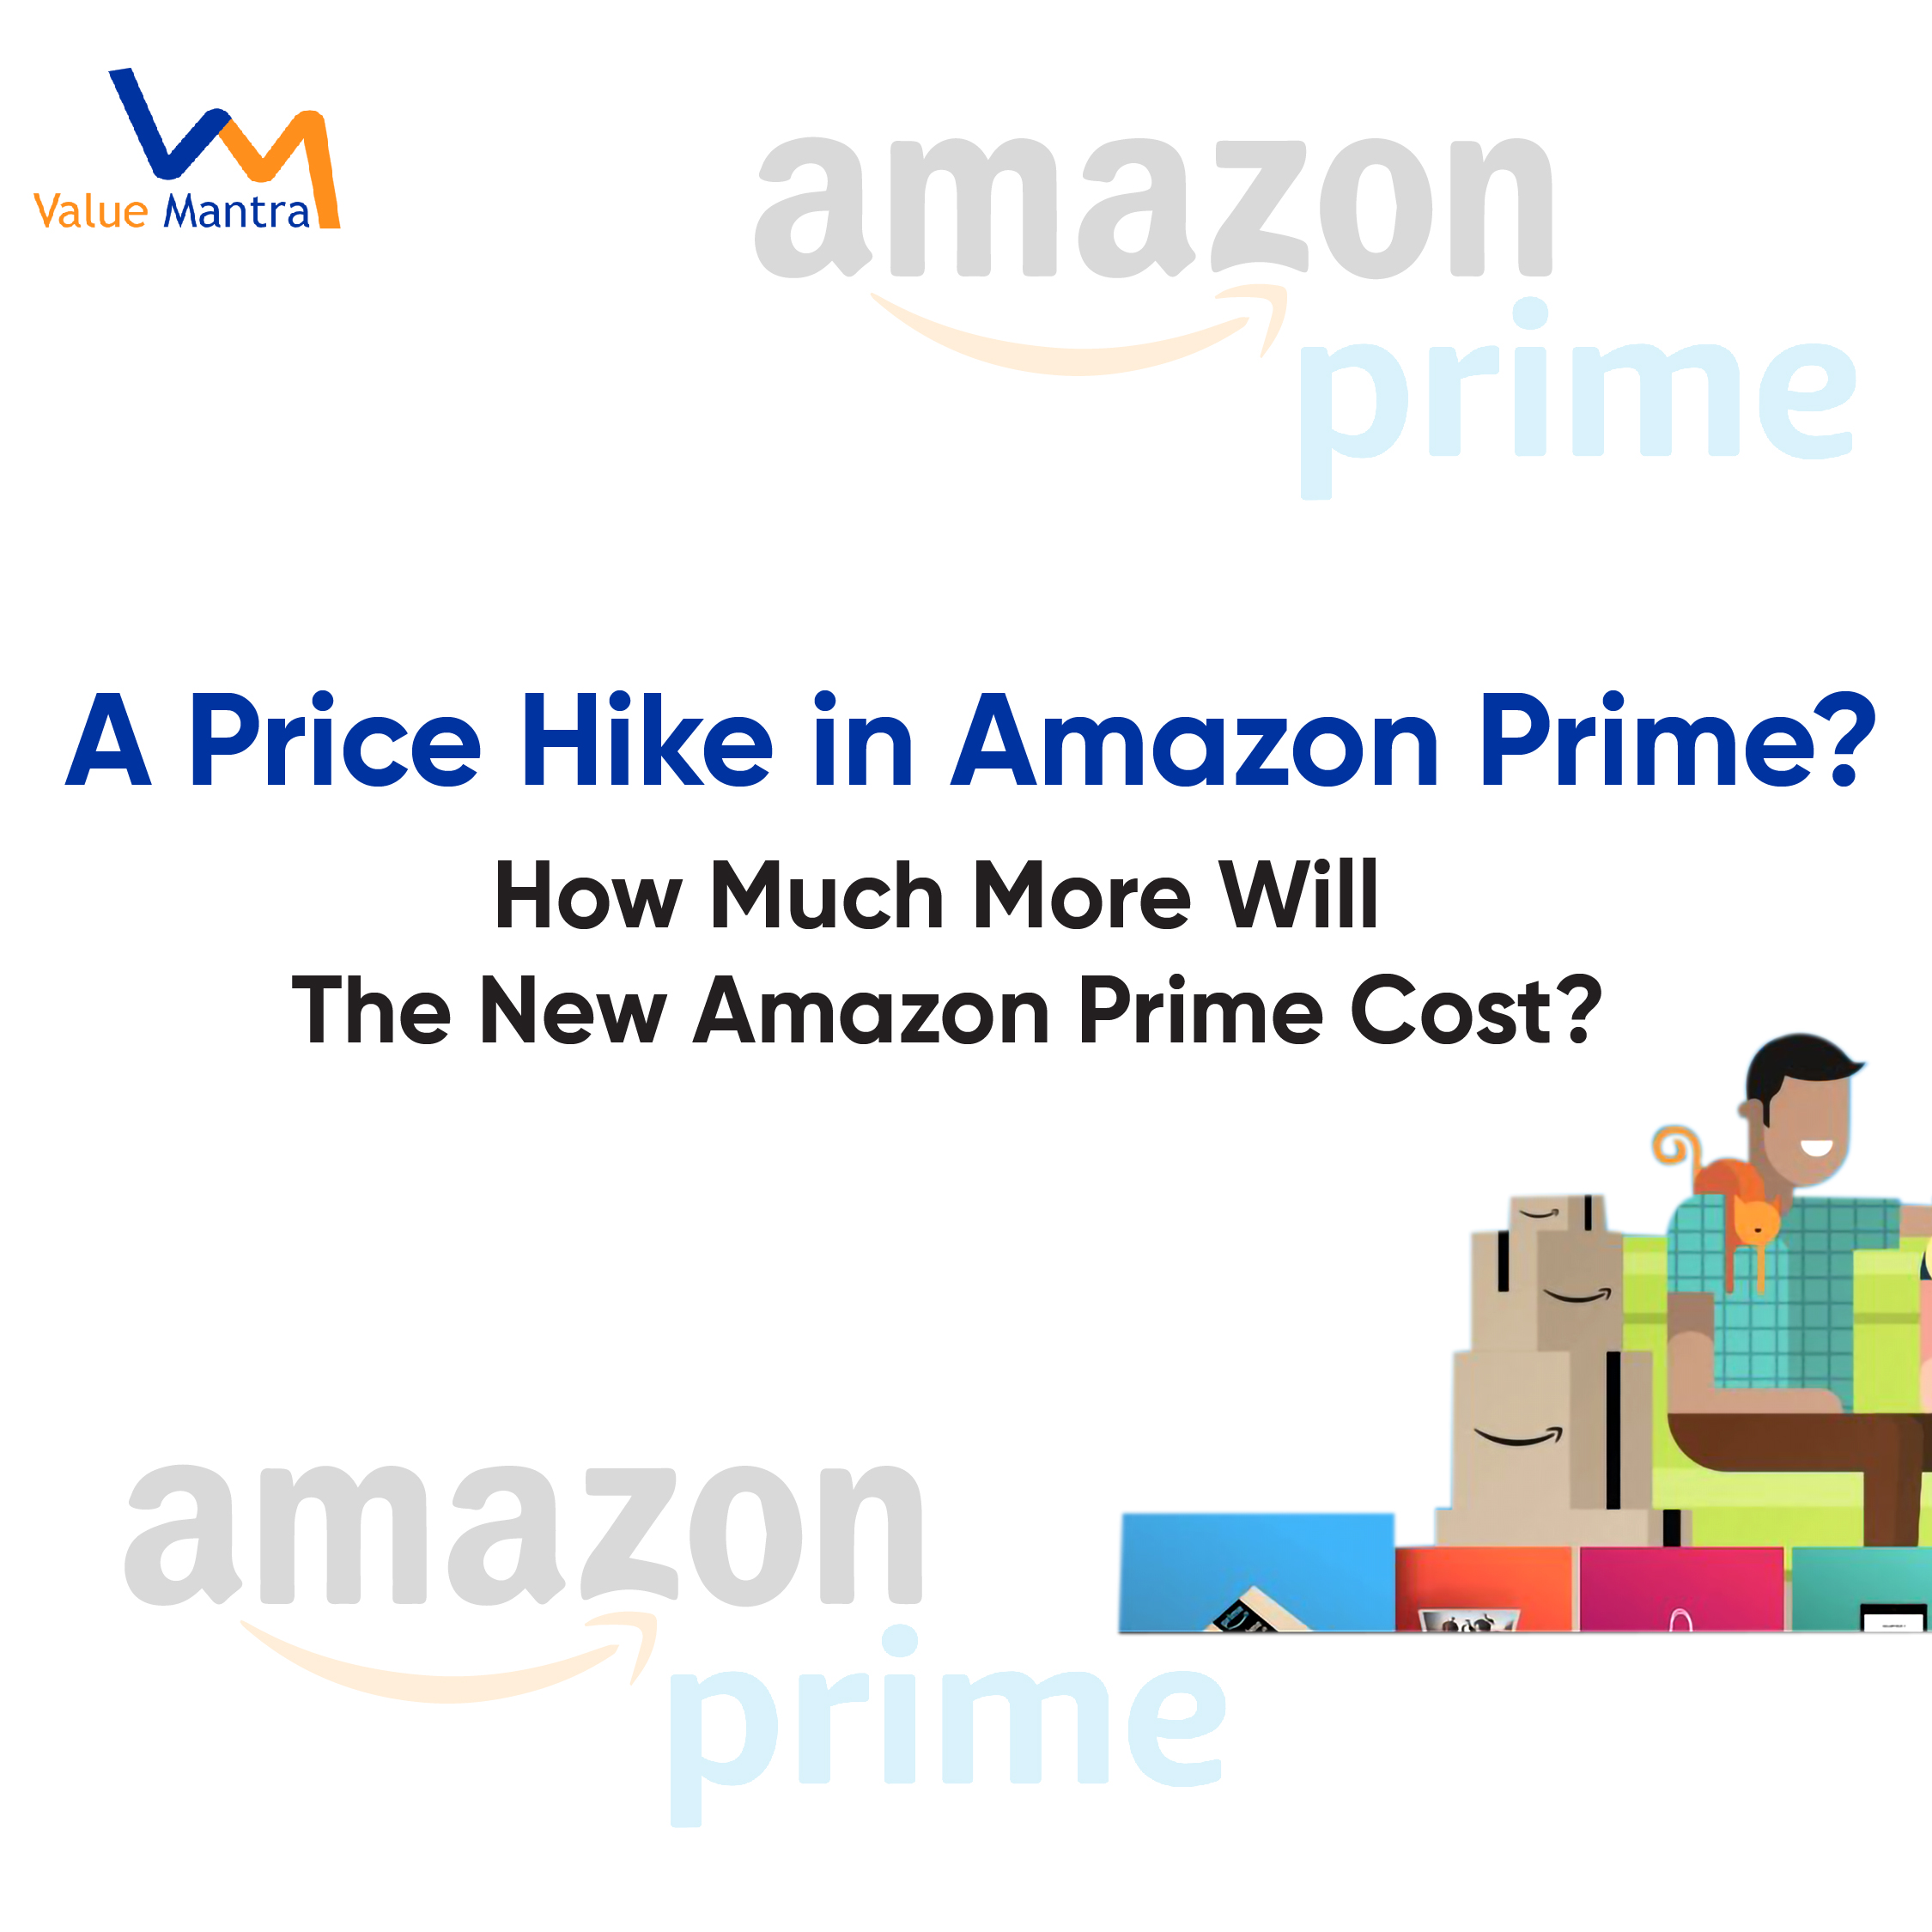 A Price Hike in Amazon Prime? How Much More Will the New Amazon Prime Cost?